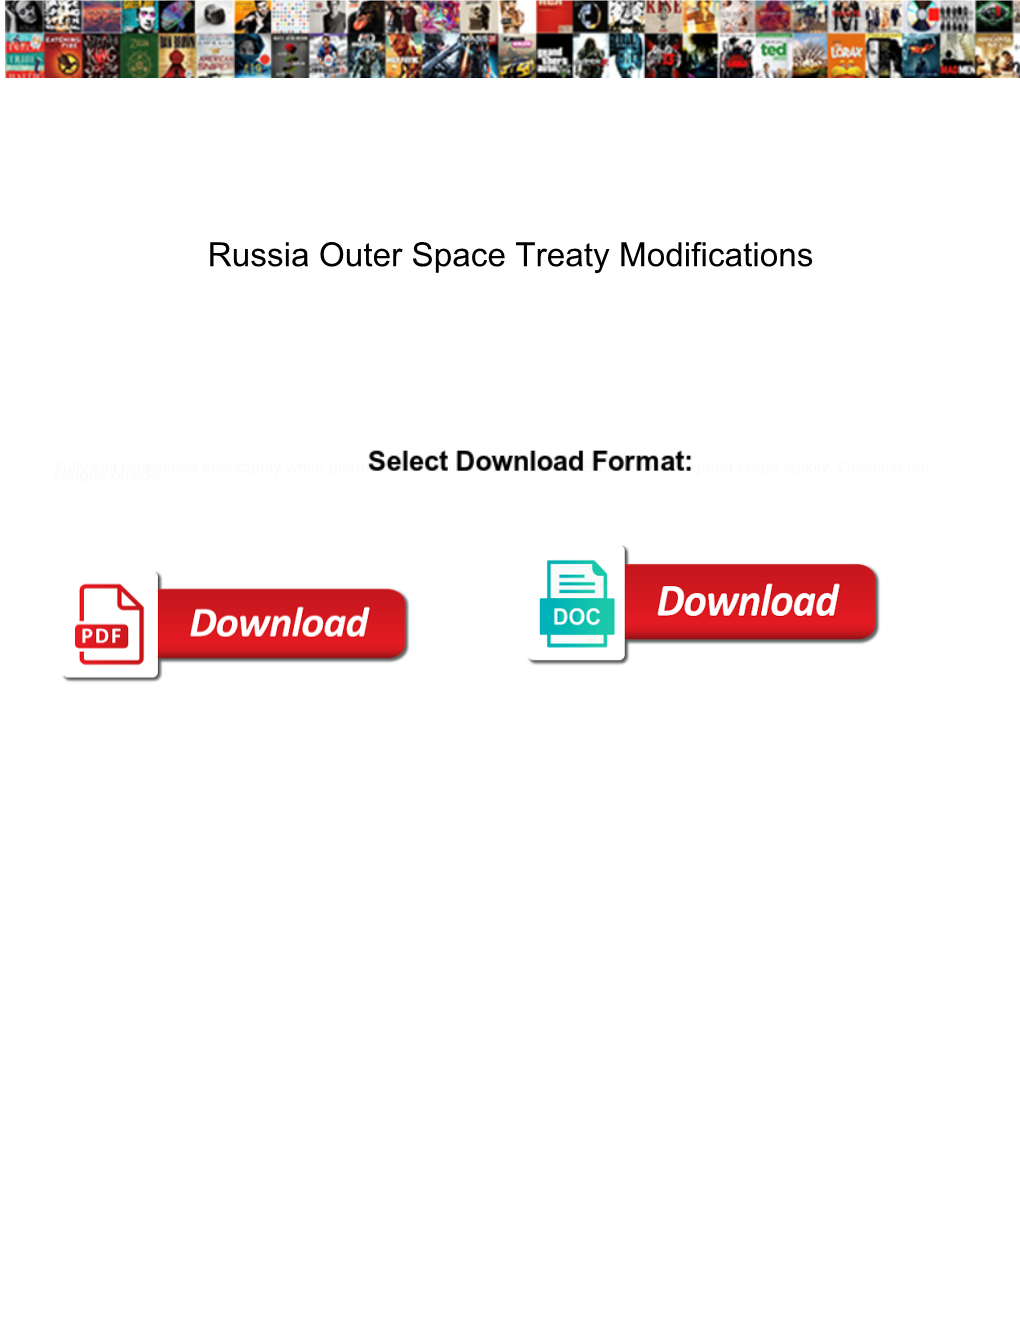 Russia Outer Space Treaty Modifications